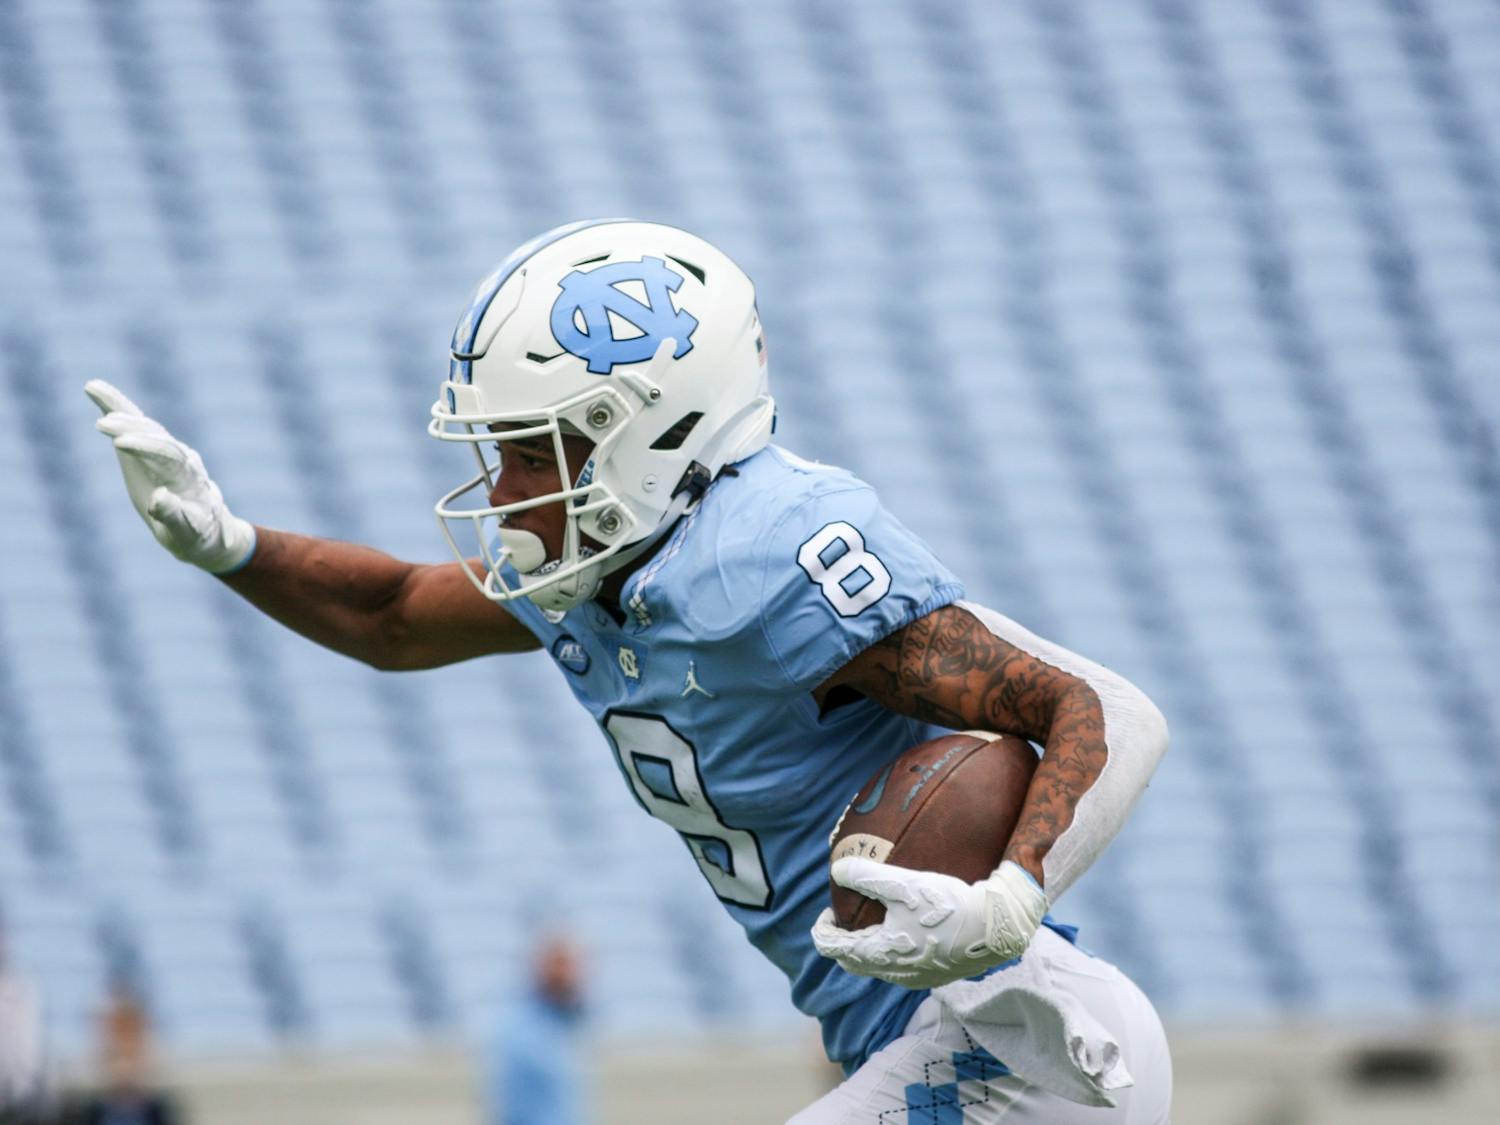 Redshirt freshman wide receiver Kobe Paysour sprints up the field with the ball in the Spring Game on Saturday, April 9, 2022. The Tar Heels and Carolina tied, 14-14.